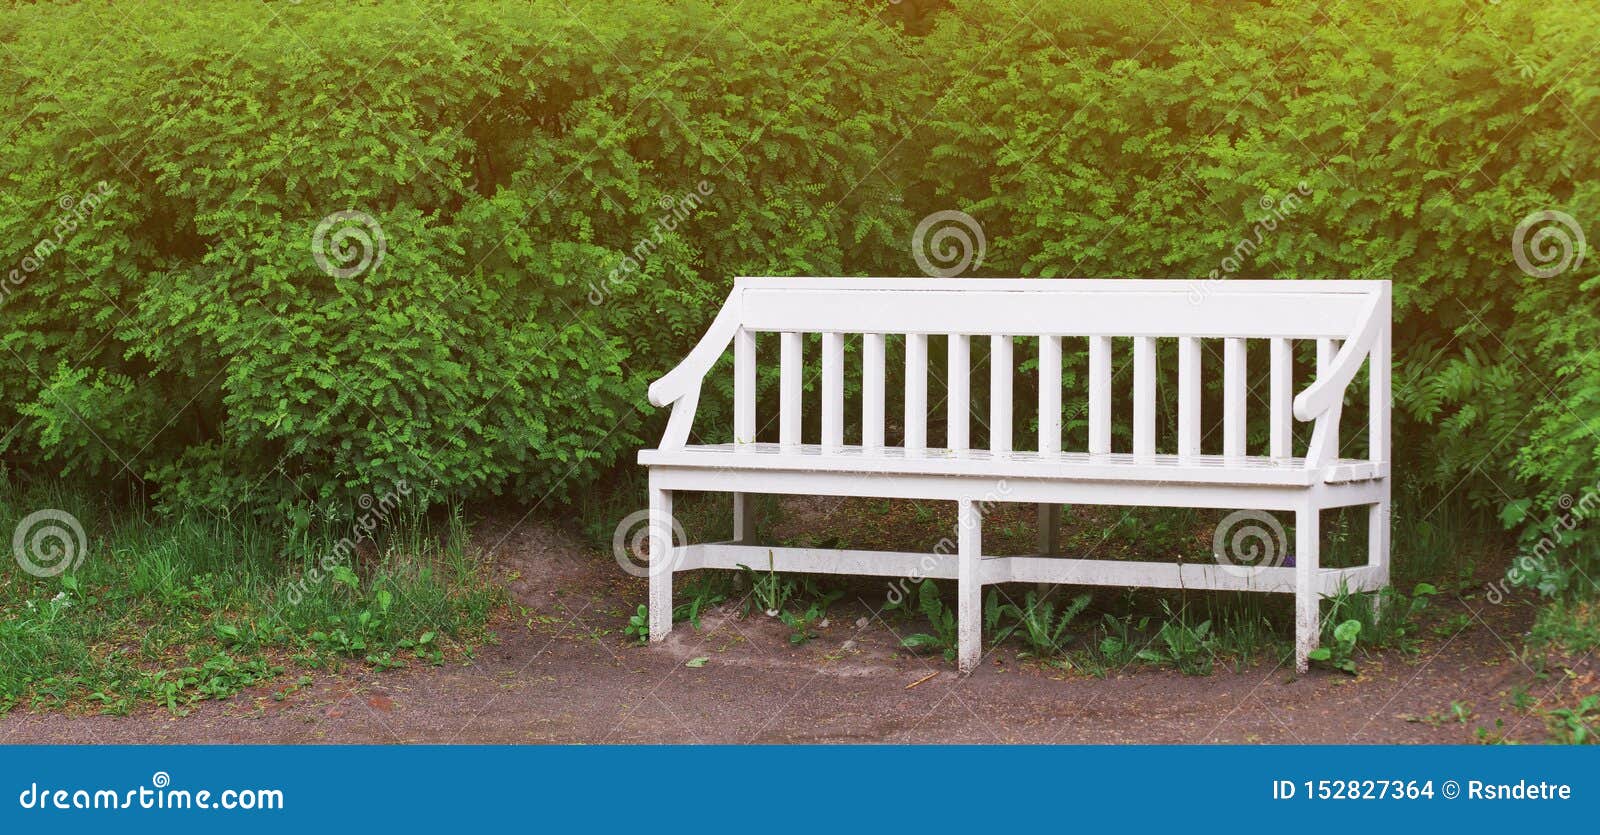 White Wooden Bench in a City Park in Spring Time and Trees on Background.  Empty Green Garden Chair at Summer Grass Stock Photo - Image of nature,  empty: 152827364